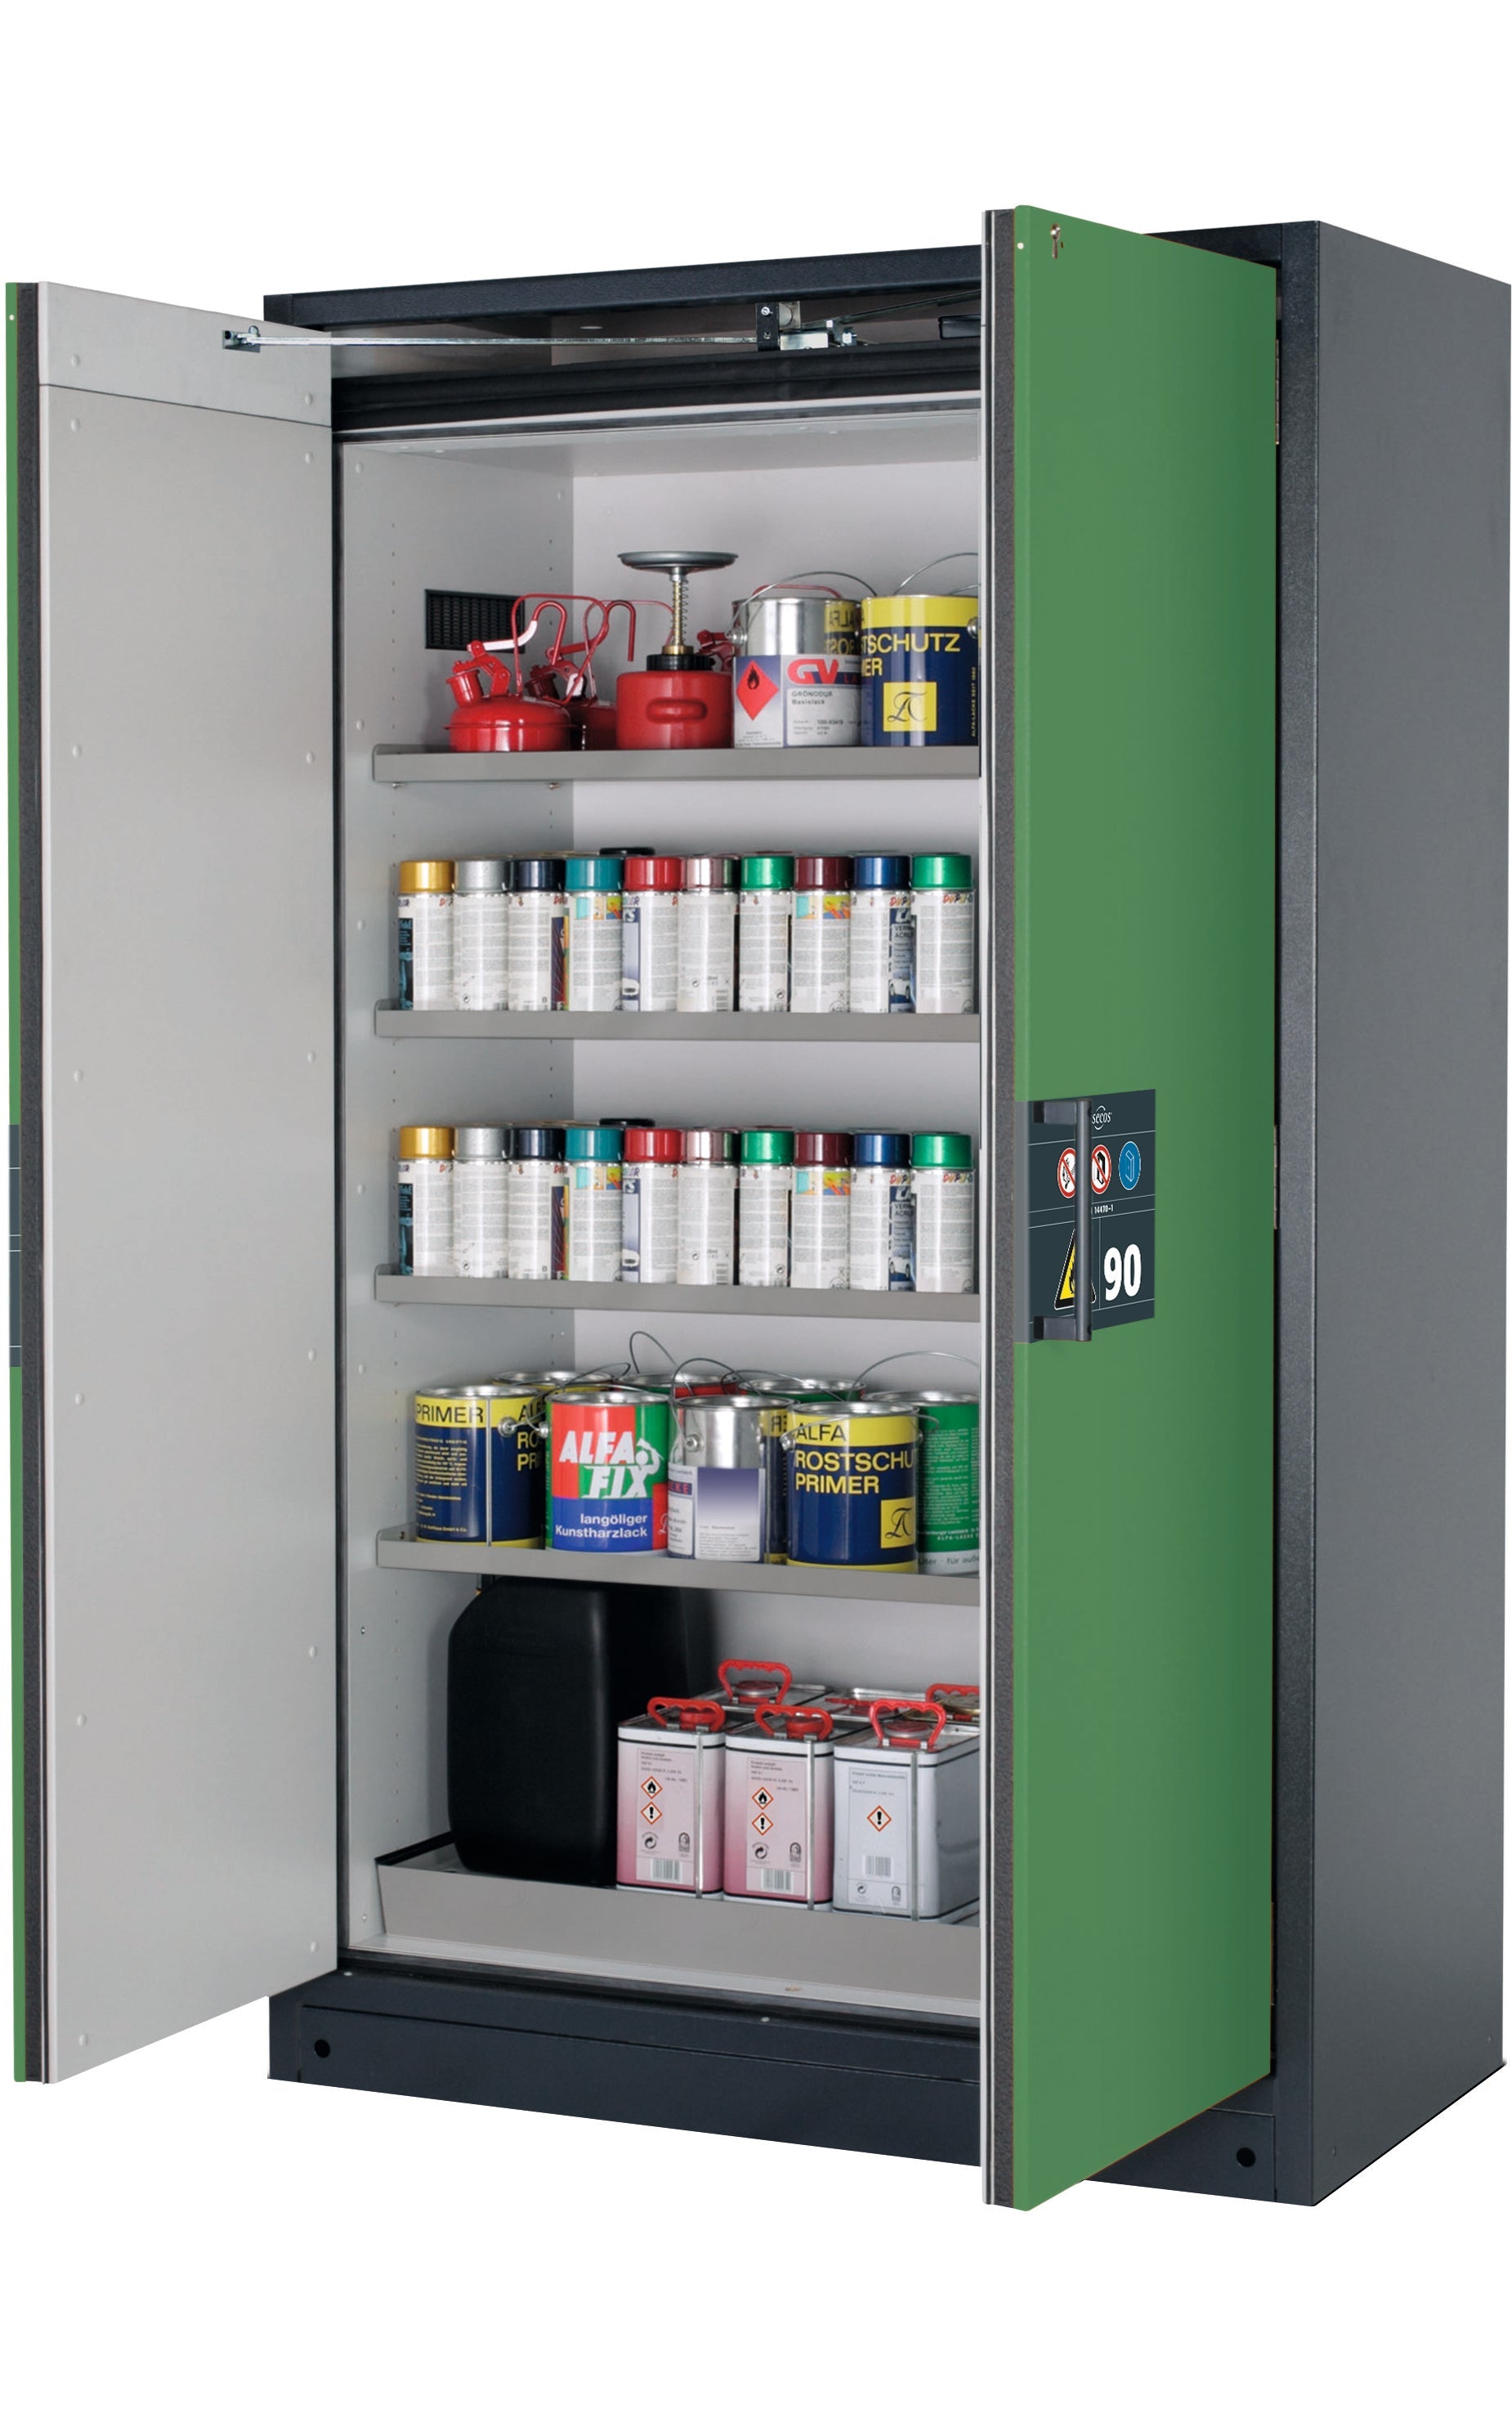 Type 90 safety storage cabinet Q-PEGASUS-90 model Q90.195.120.WDAC in reseda green RAL 6011 with 4x shelf standard (stainless steel 1.4301),